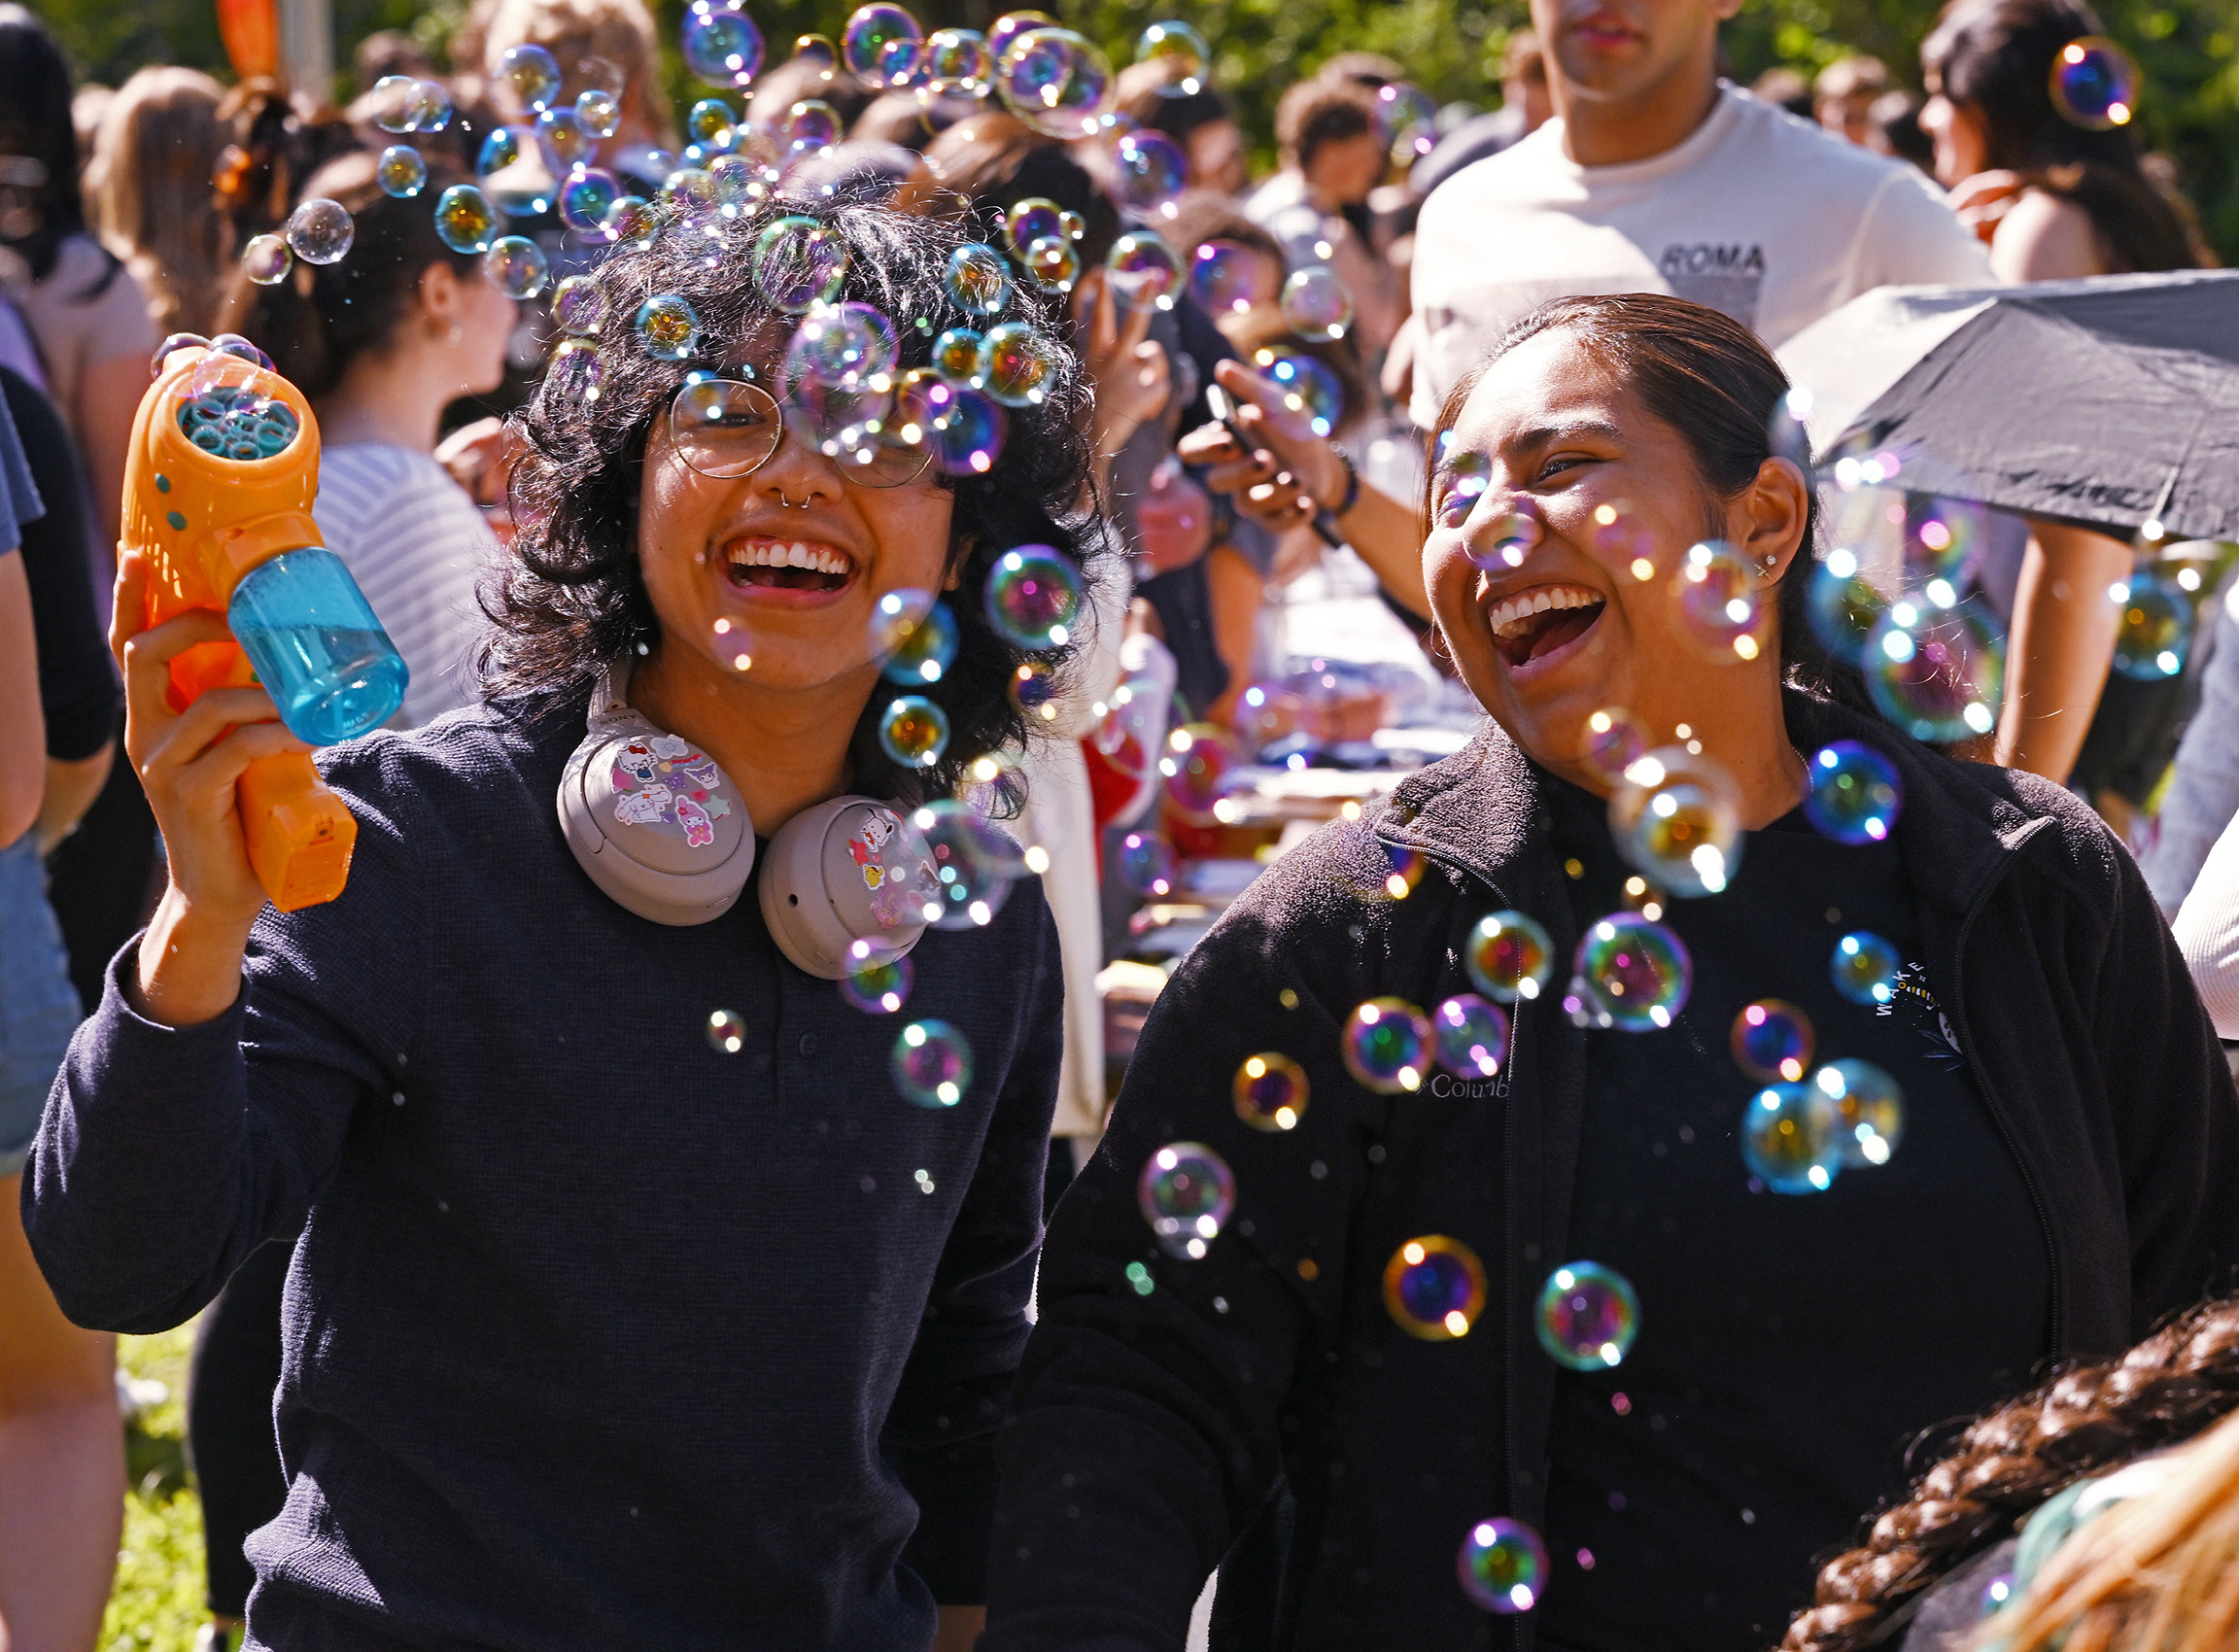 Students blow bubbles at the Fall carnival